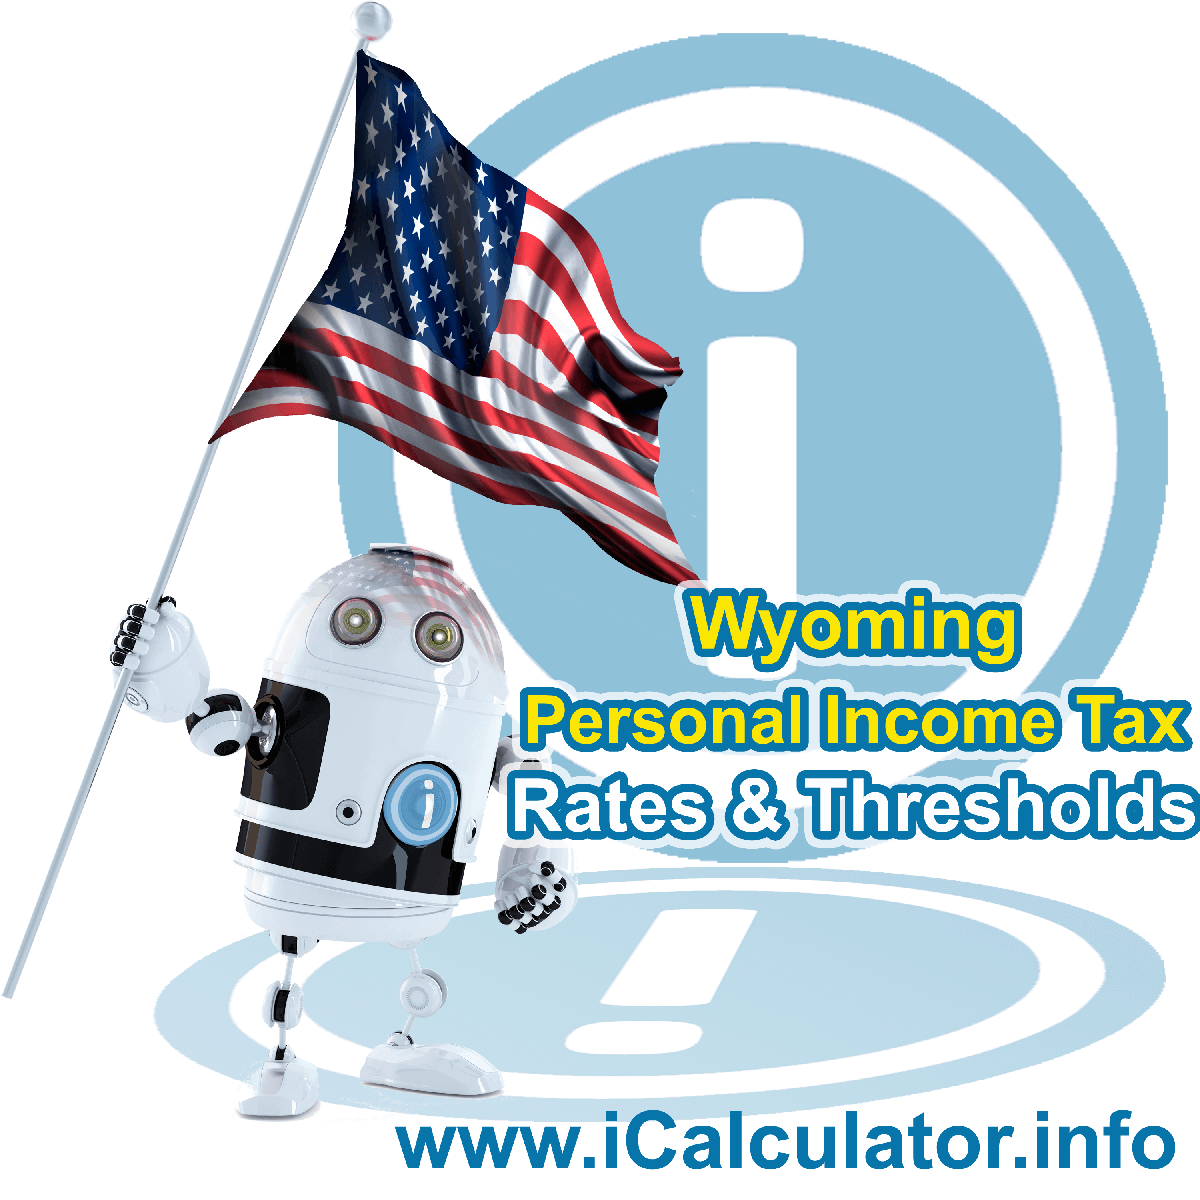 Wyoming State Tax Tables 2022. This image displays details of the Wyoming State Tax Tables for the 2022 tax return year which is provided in support of the 2022 US Tax Calculator